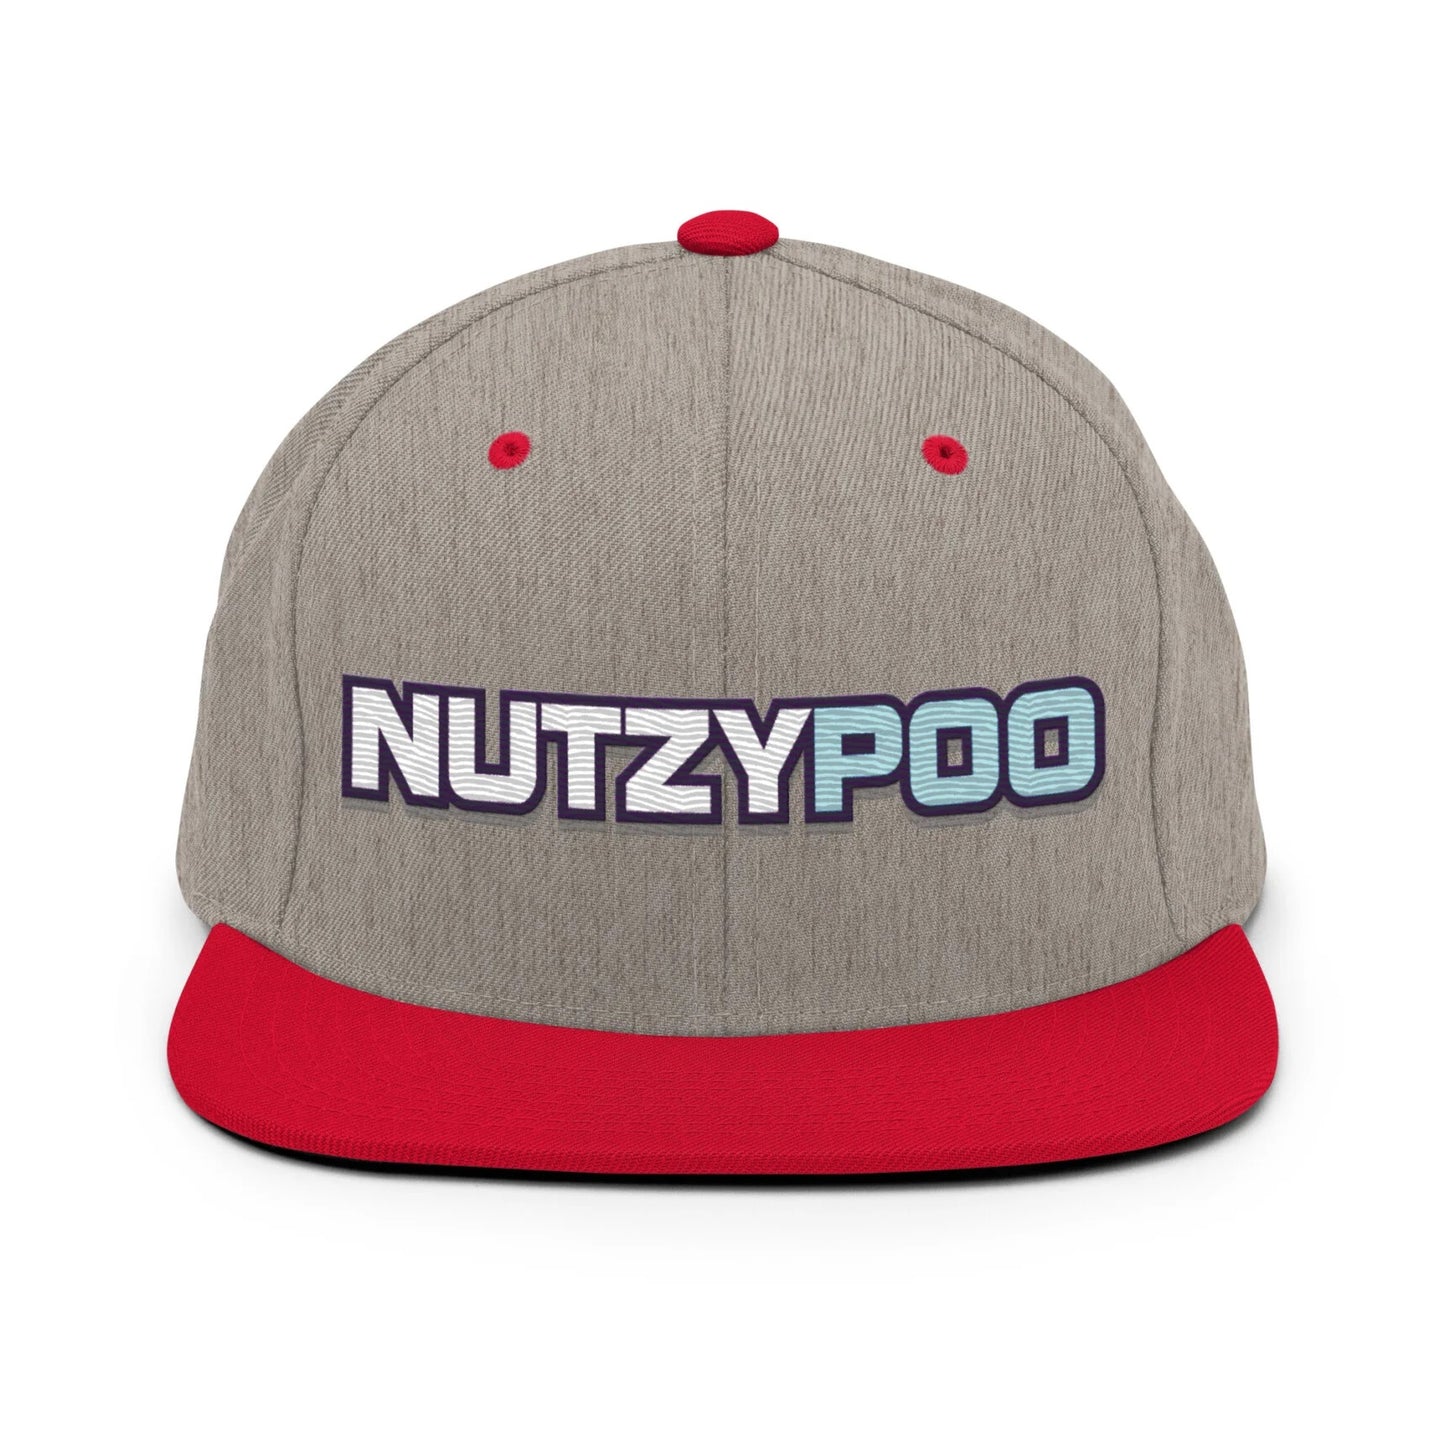 NutzyPoo ShowZone hat in heather grey with red brim and accents